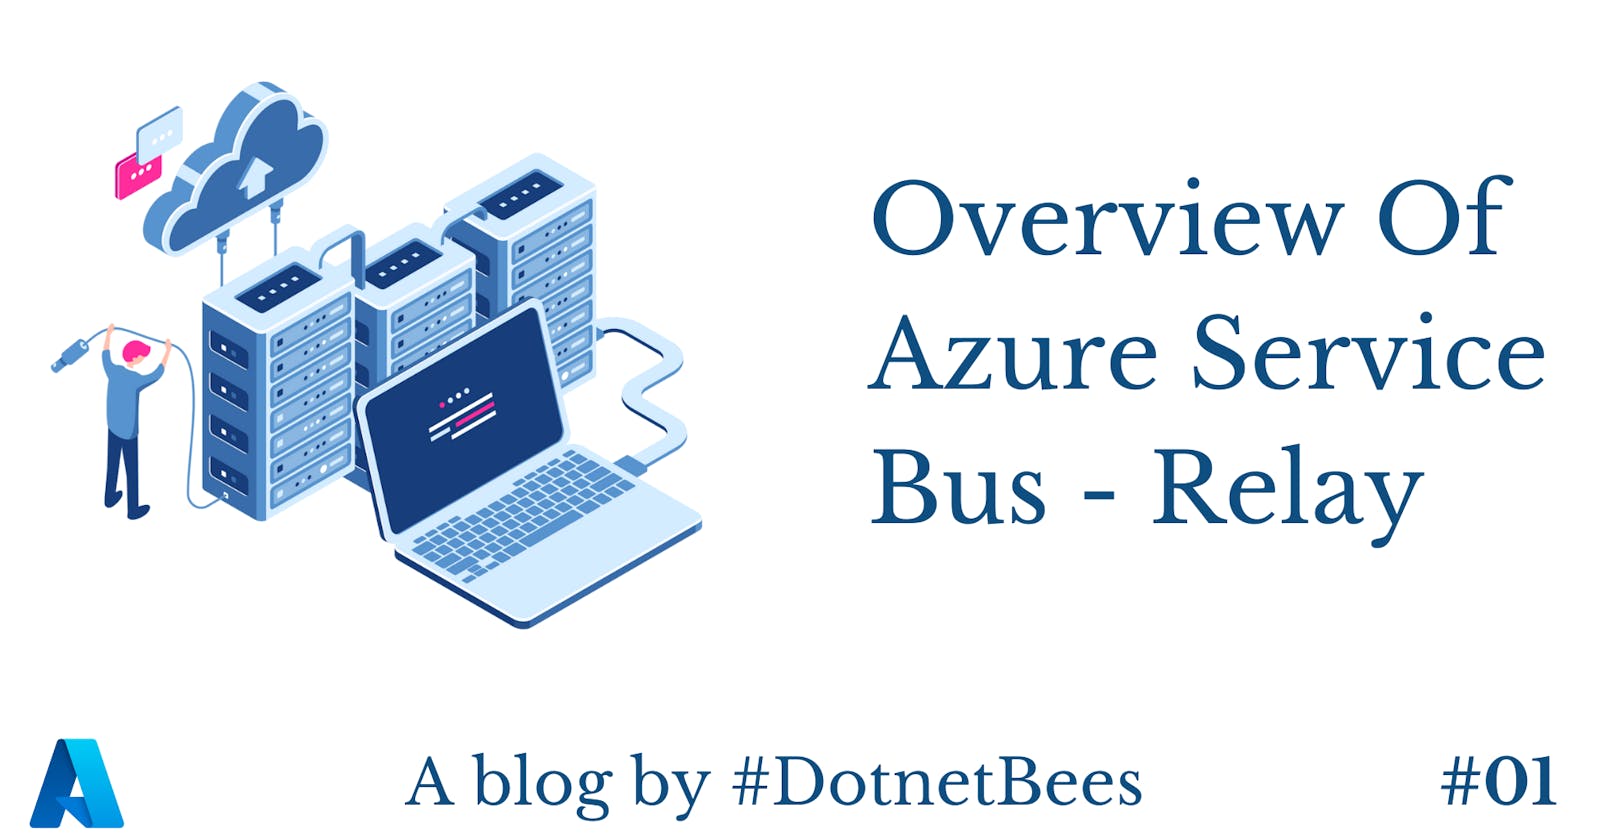 Overview Of Azure Service Bus - Relay